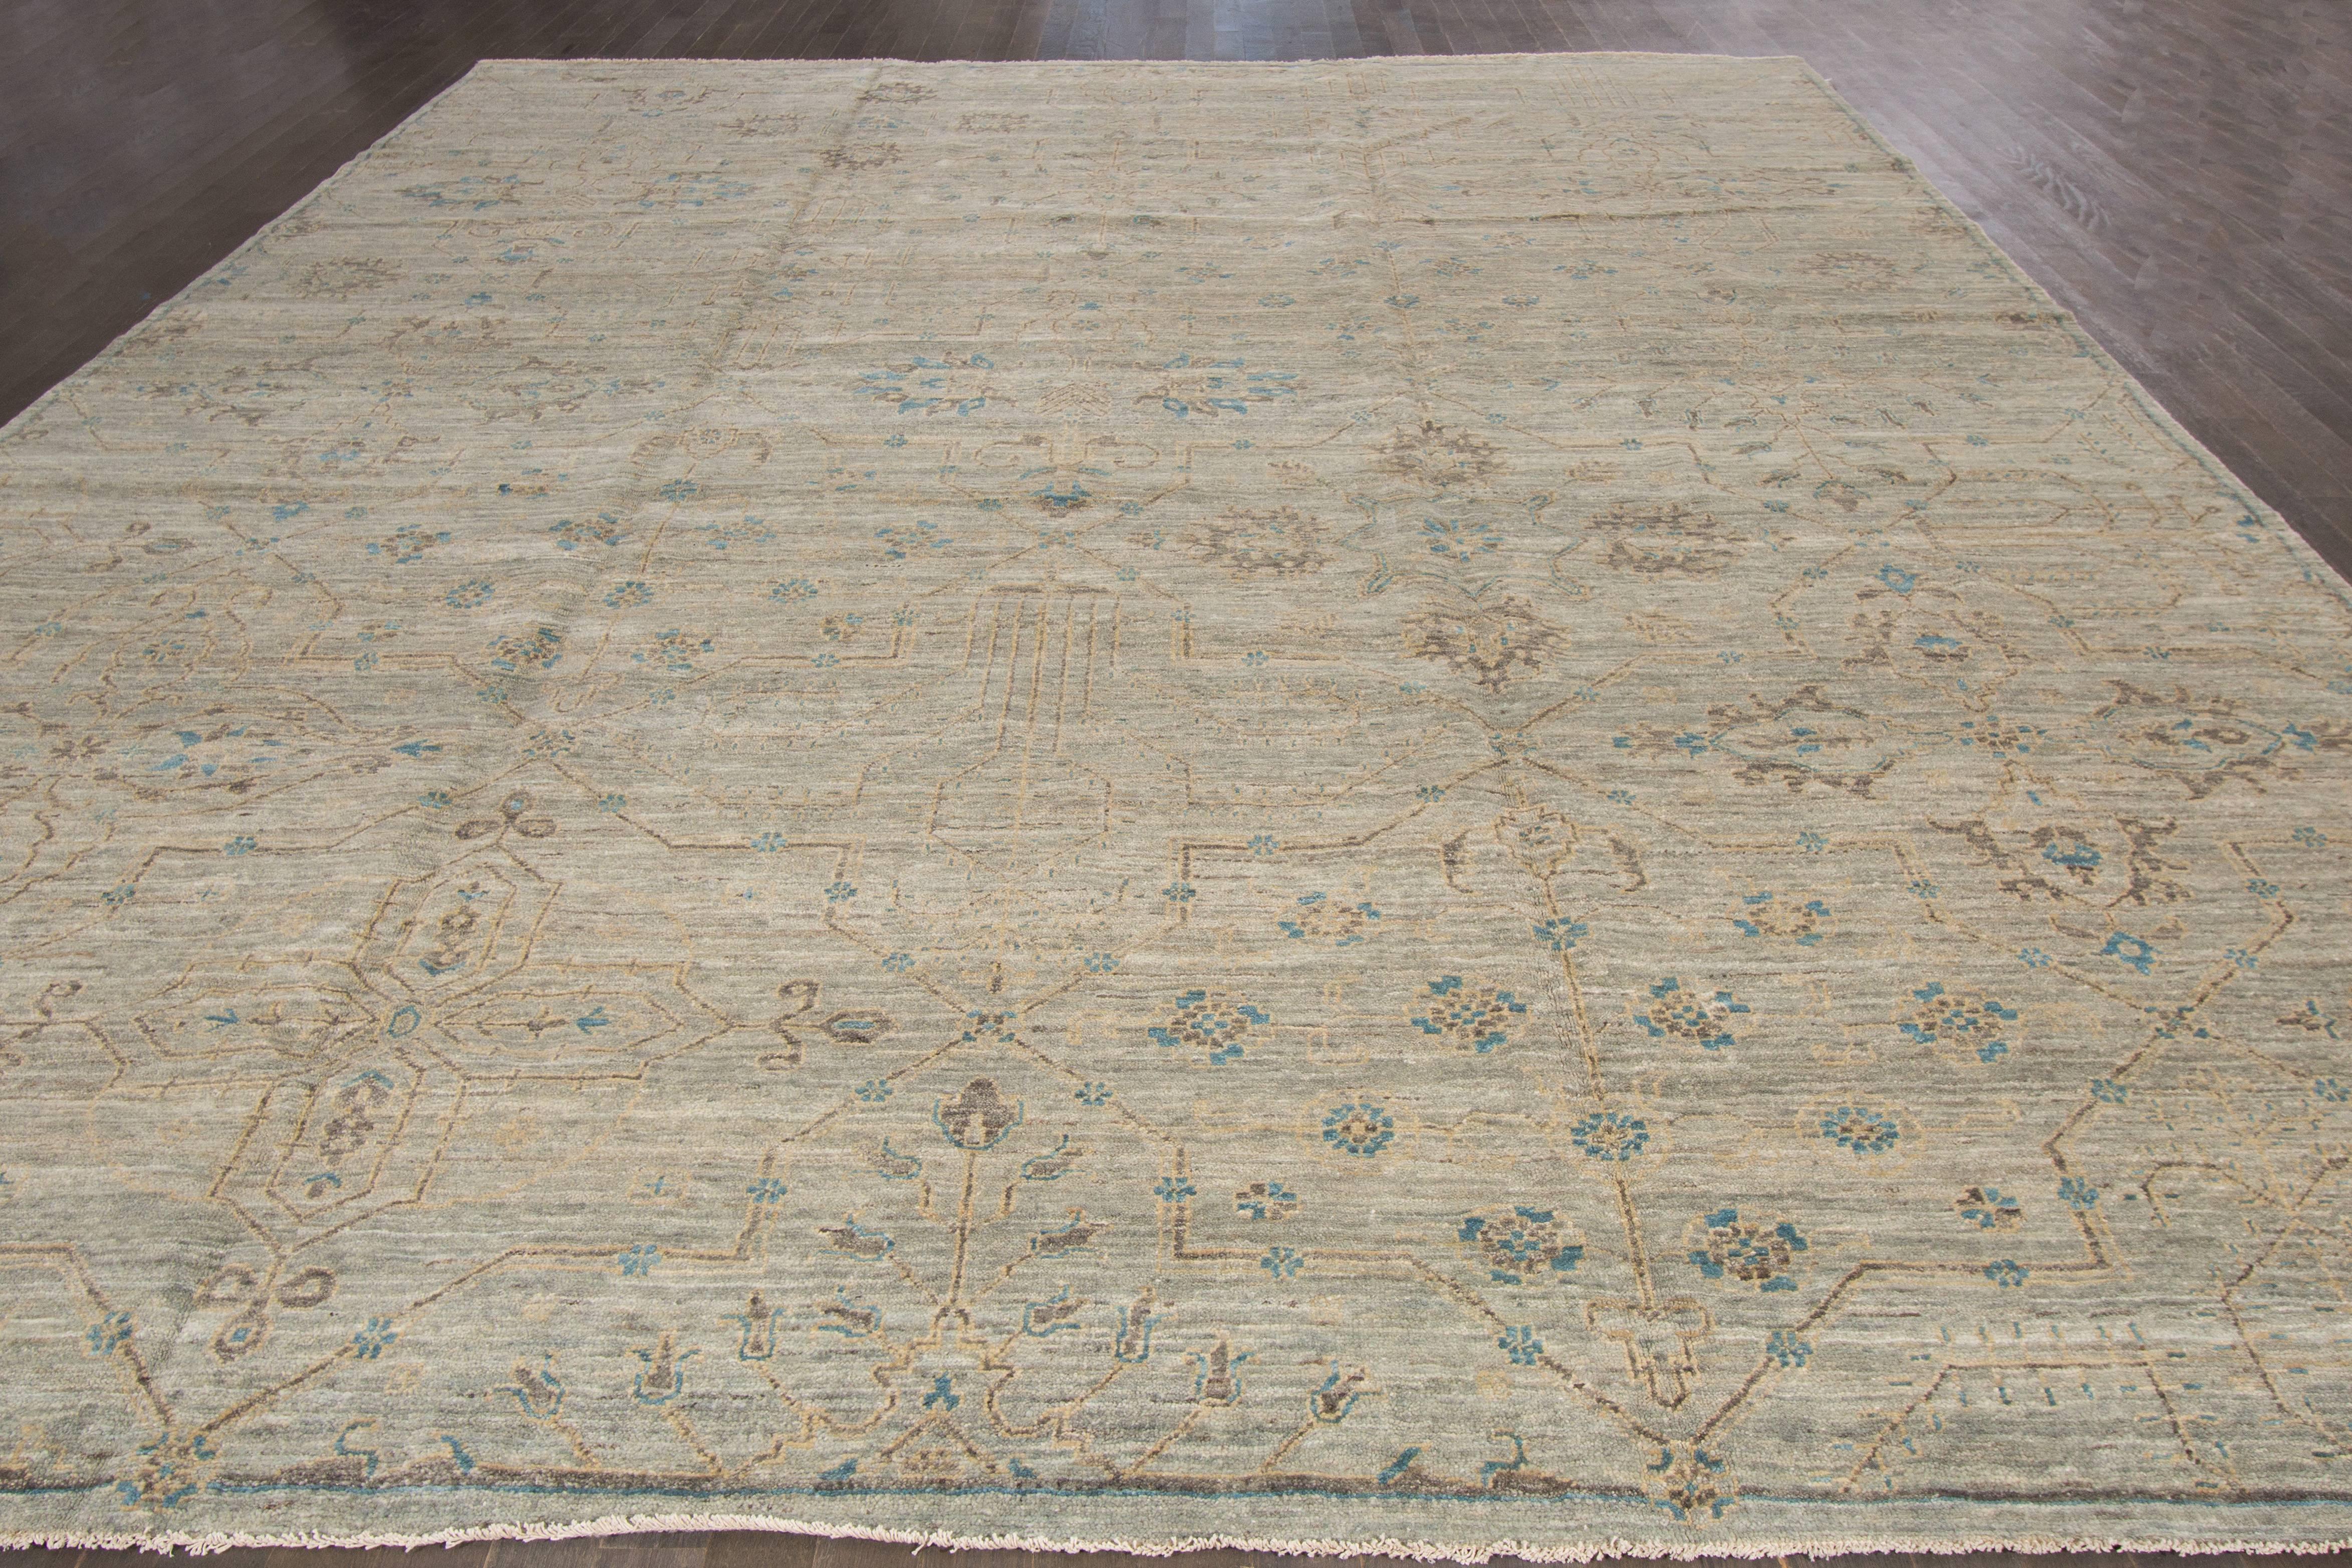 Hand-knotted modern rug with an all-over floral design on a gray field. Measures: 11'11